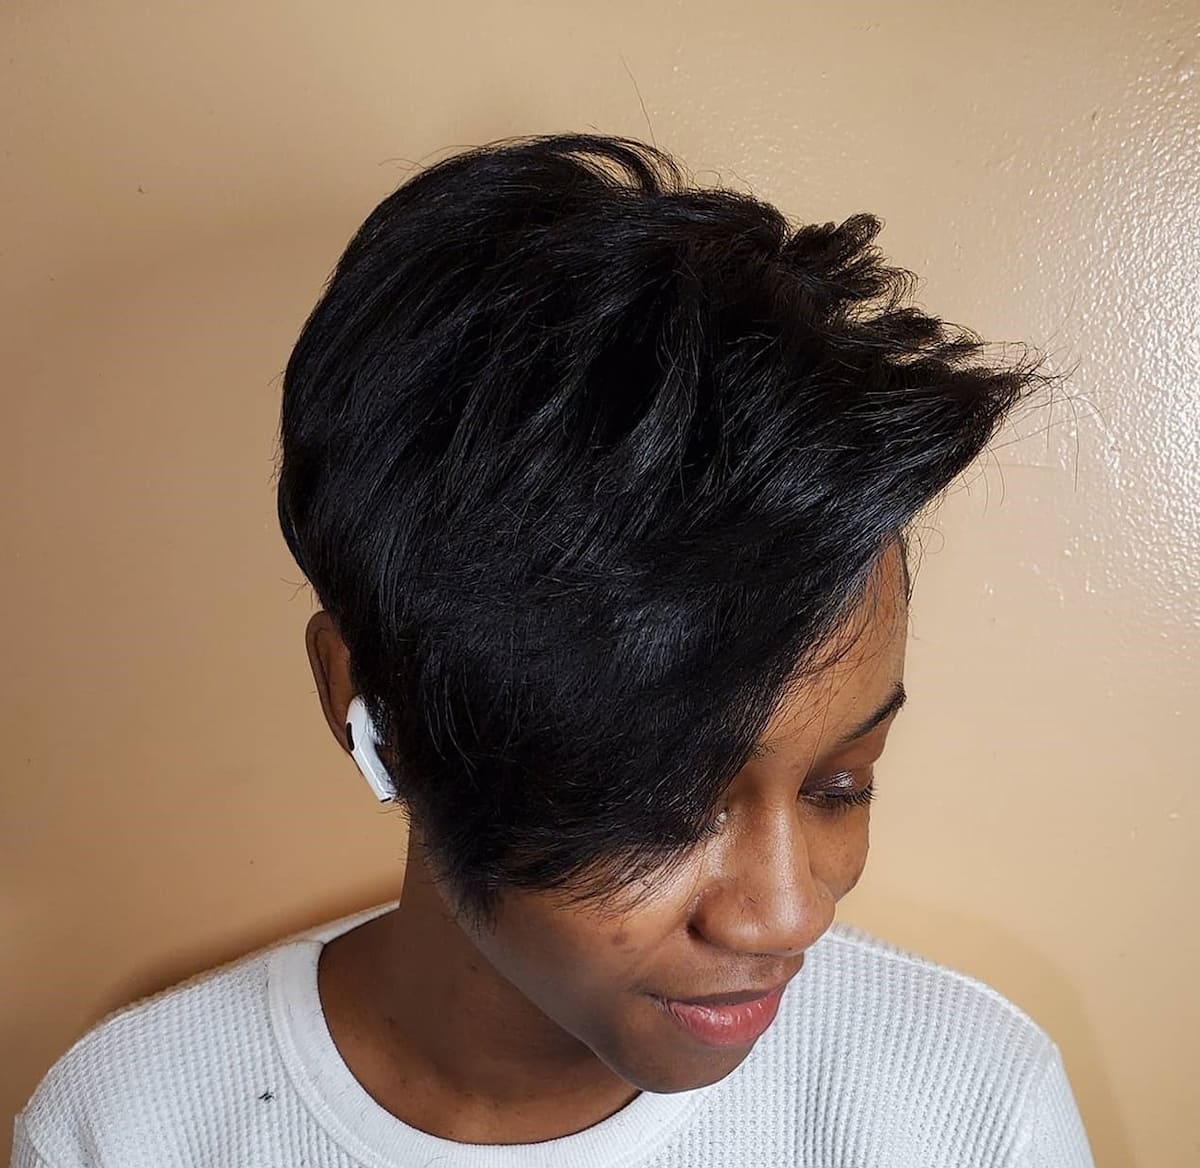 Flattering Short Hairstyles for Round Faces: The right haircut will make  you look slimmer!